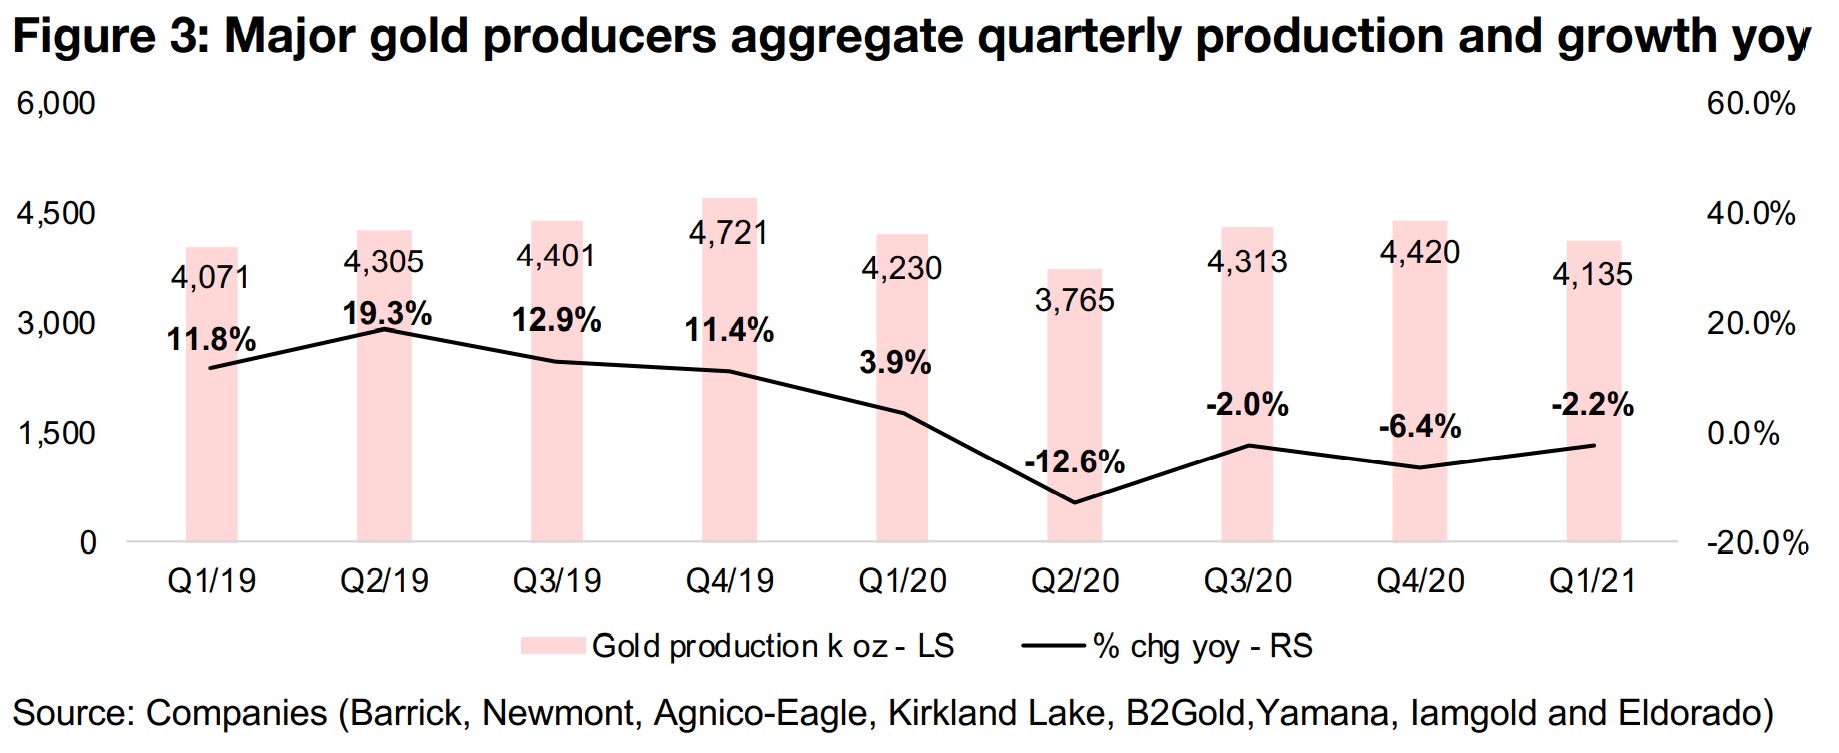 2) Q1/21 another strong quarter for gold producers